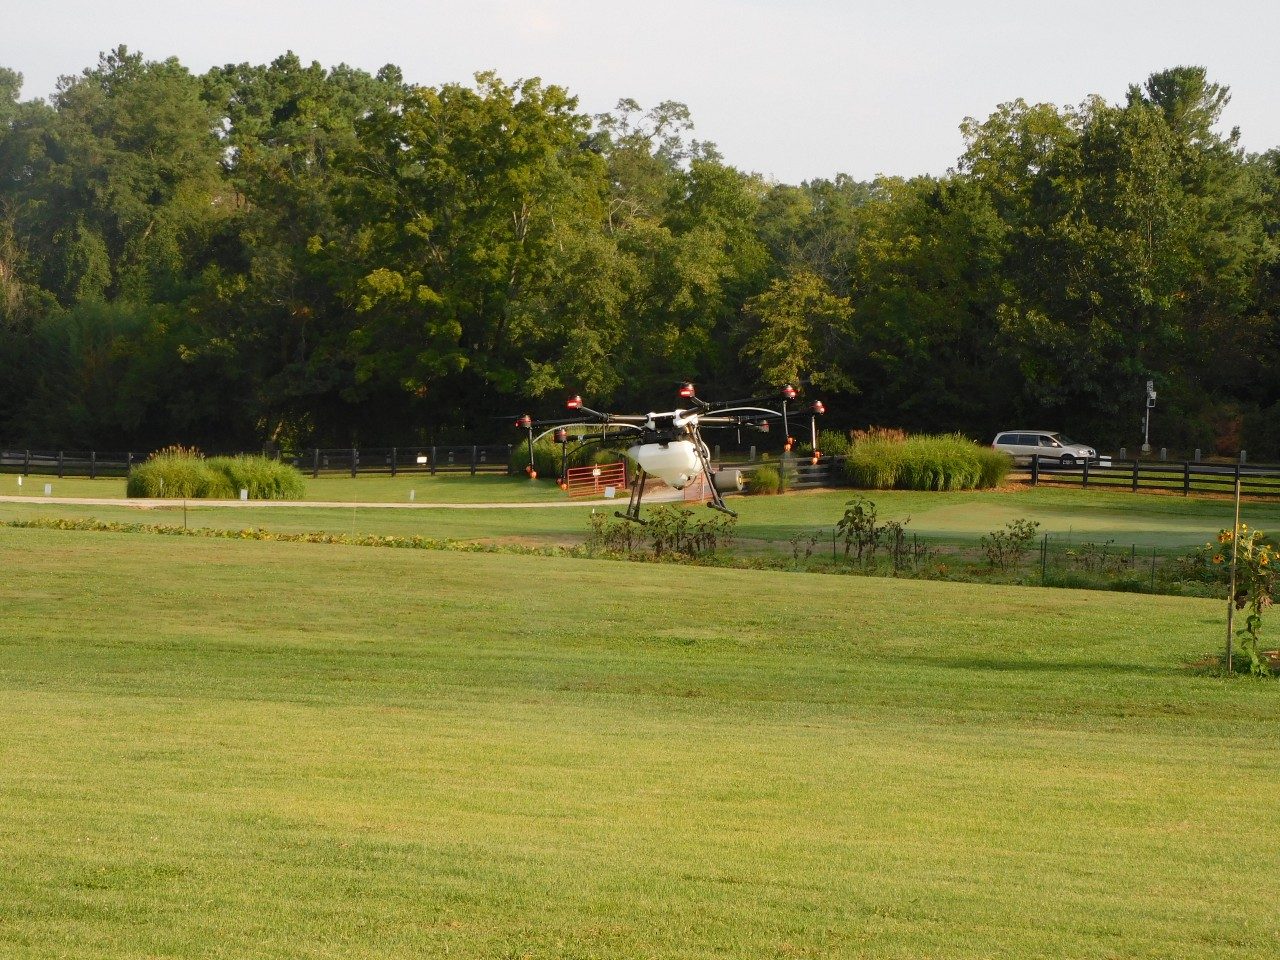 A drone hovers above the ground at the Turfgrass Research Center.